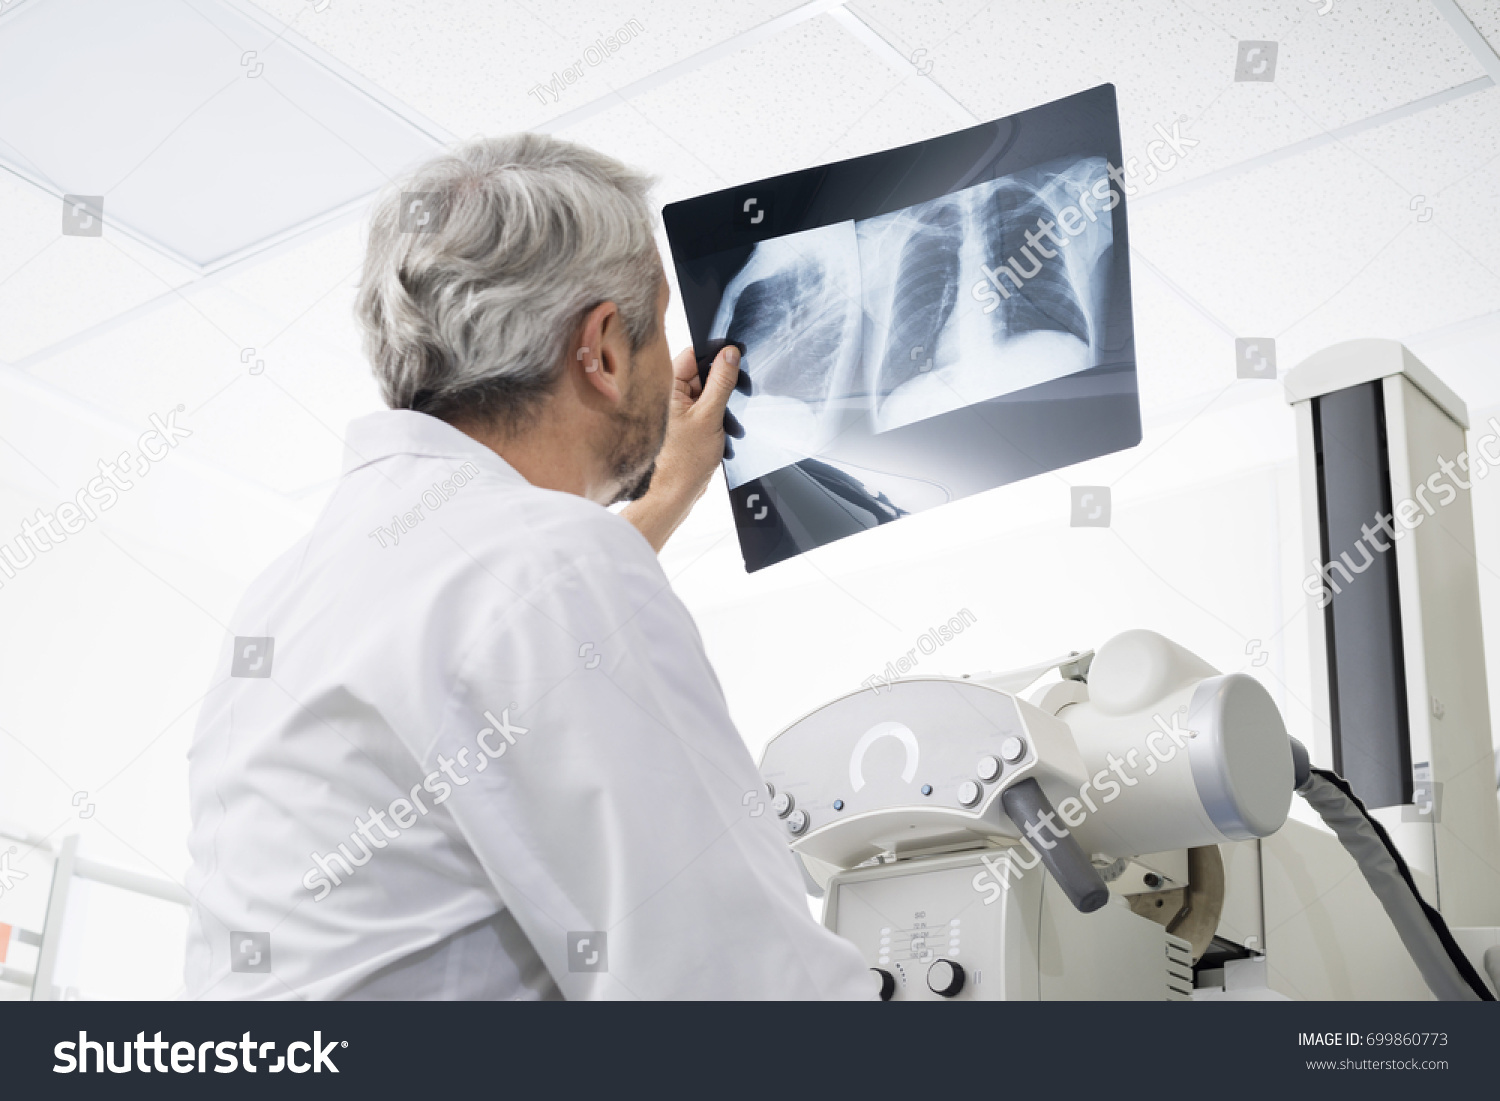 Male Doctor Analyzing Chest X-ray In Examination Room #699860773